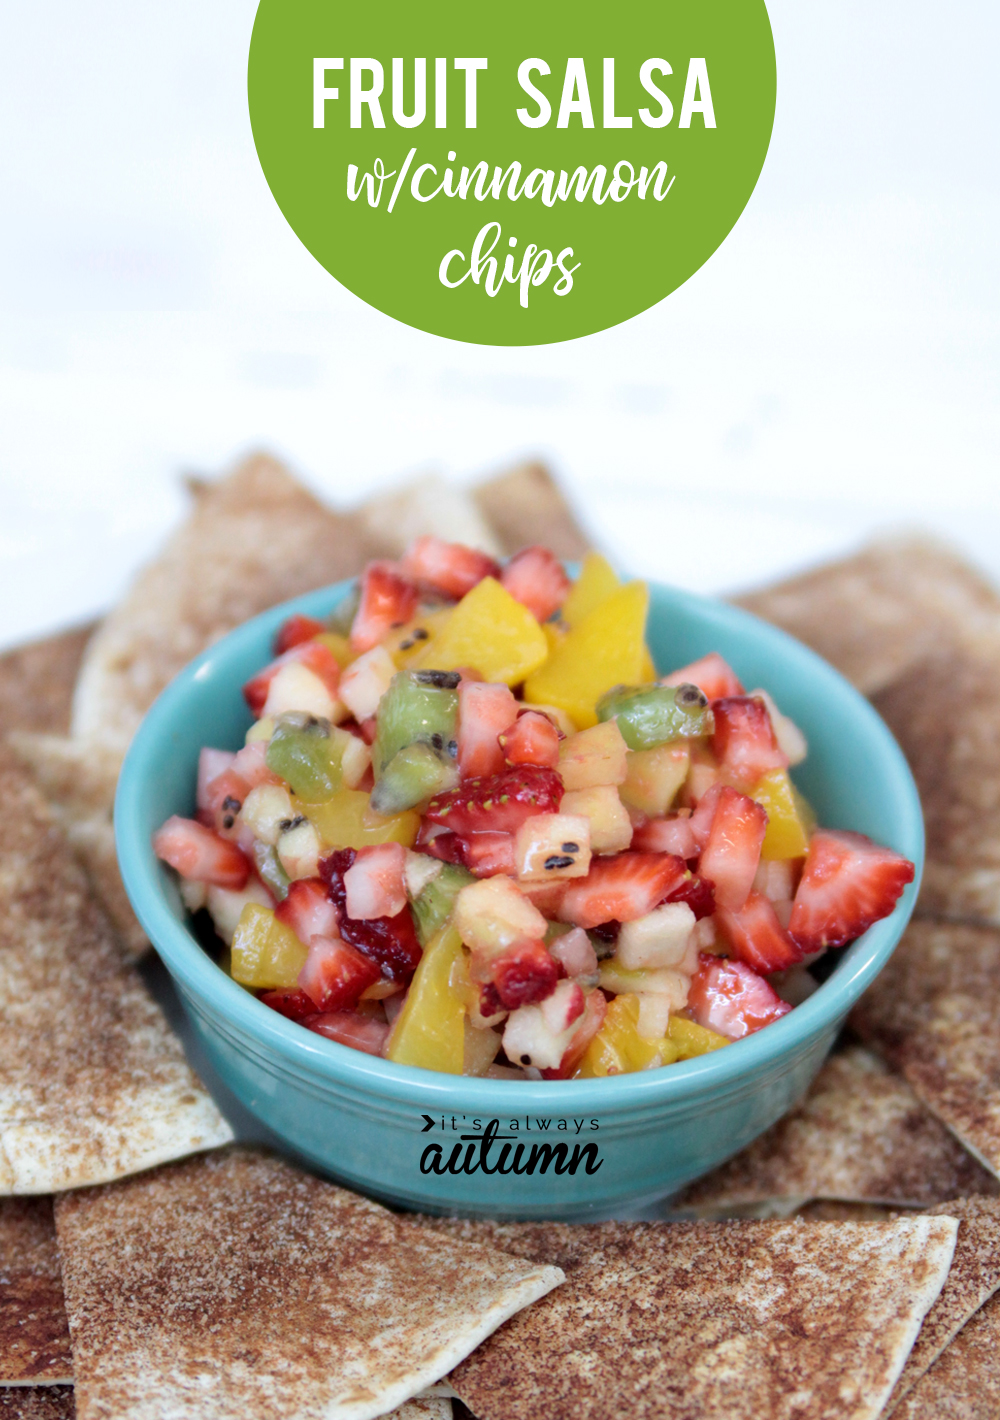 This fresh fruit salsa recipe is a super easy and healthy snack!